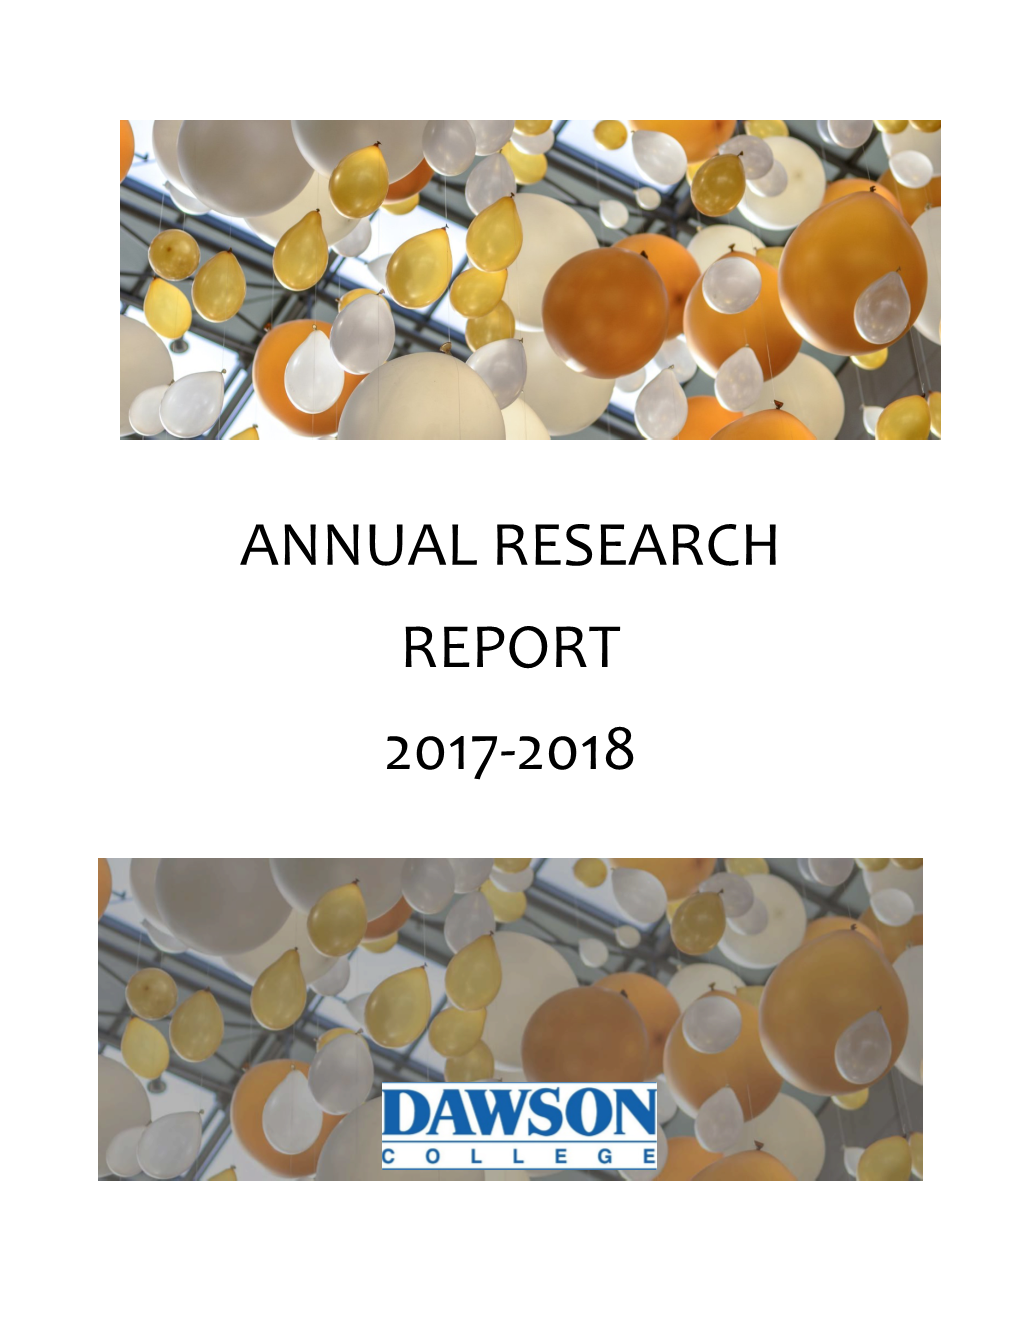 Annual Research Report 2017-2018